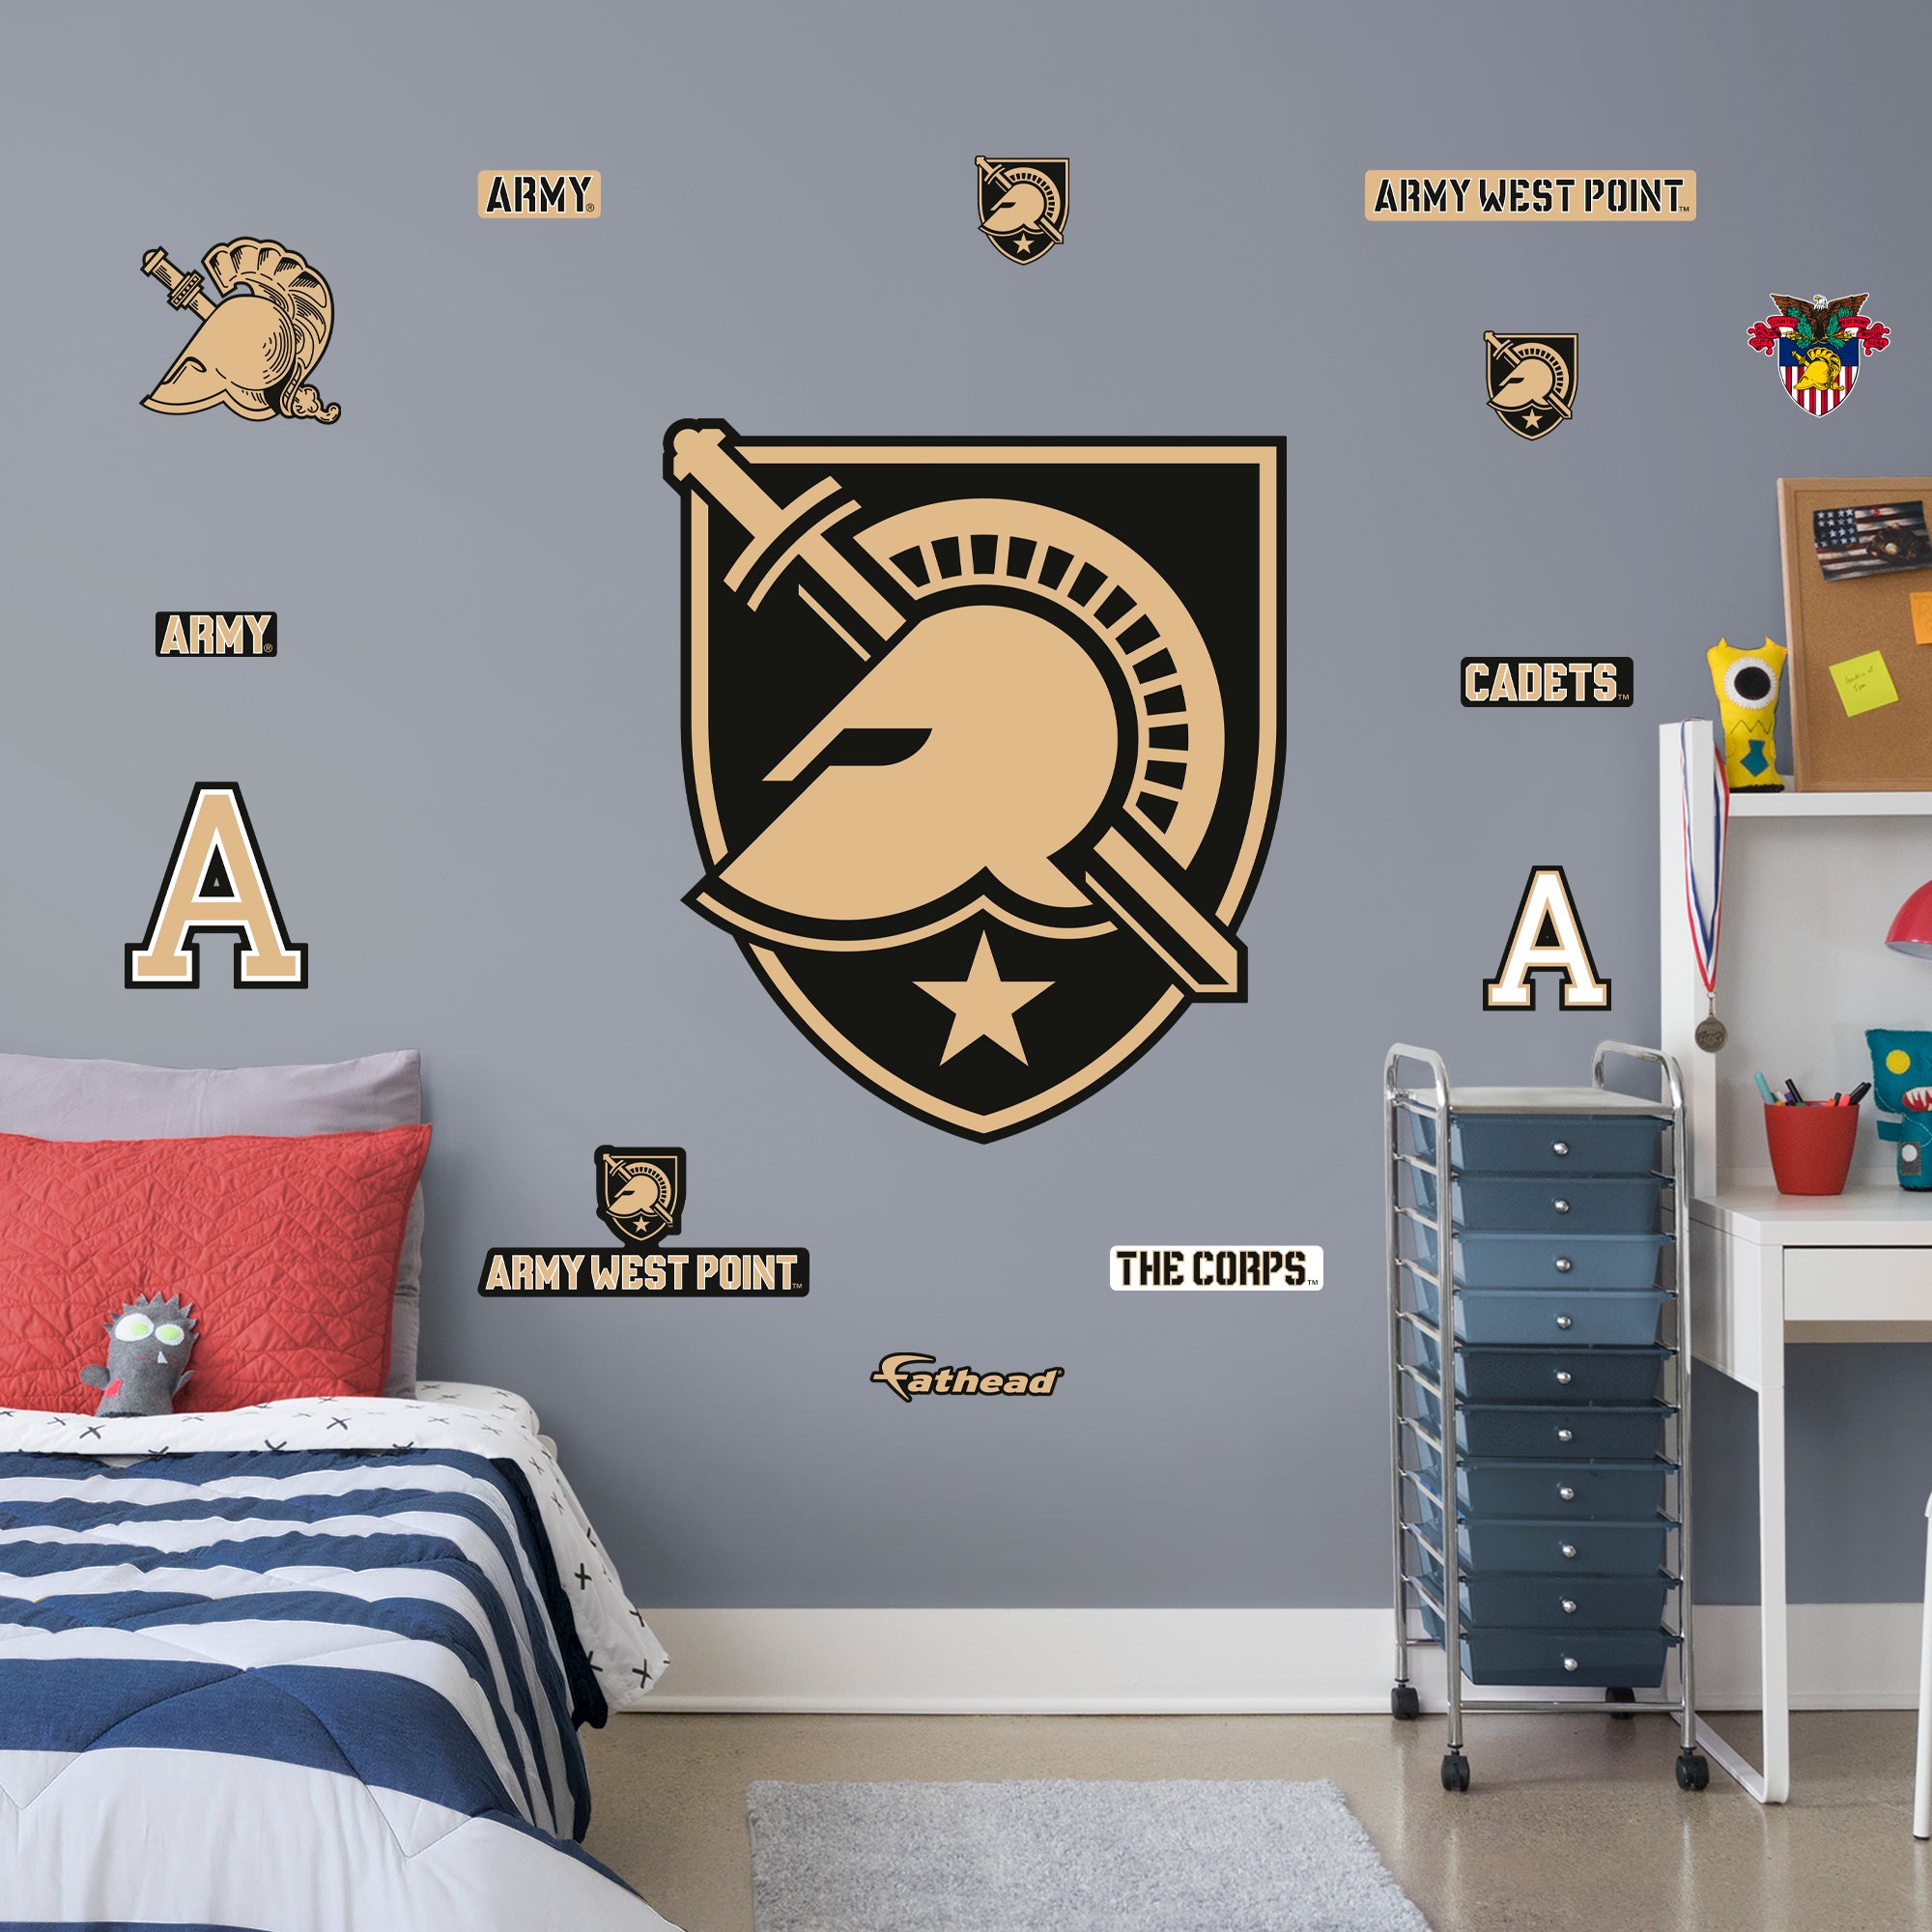 Army Black Knights 2020 RealBig Logo - Officially Licensed NCAA Removable Wall Decal Giant Decal (33"W x 38"H) by Fathead | Viny